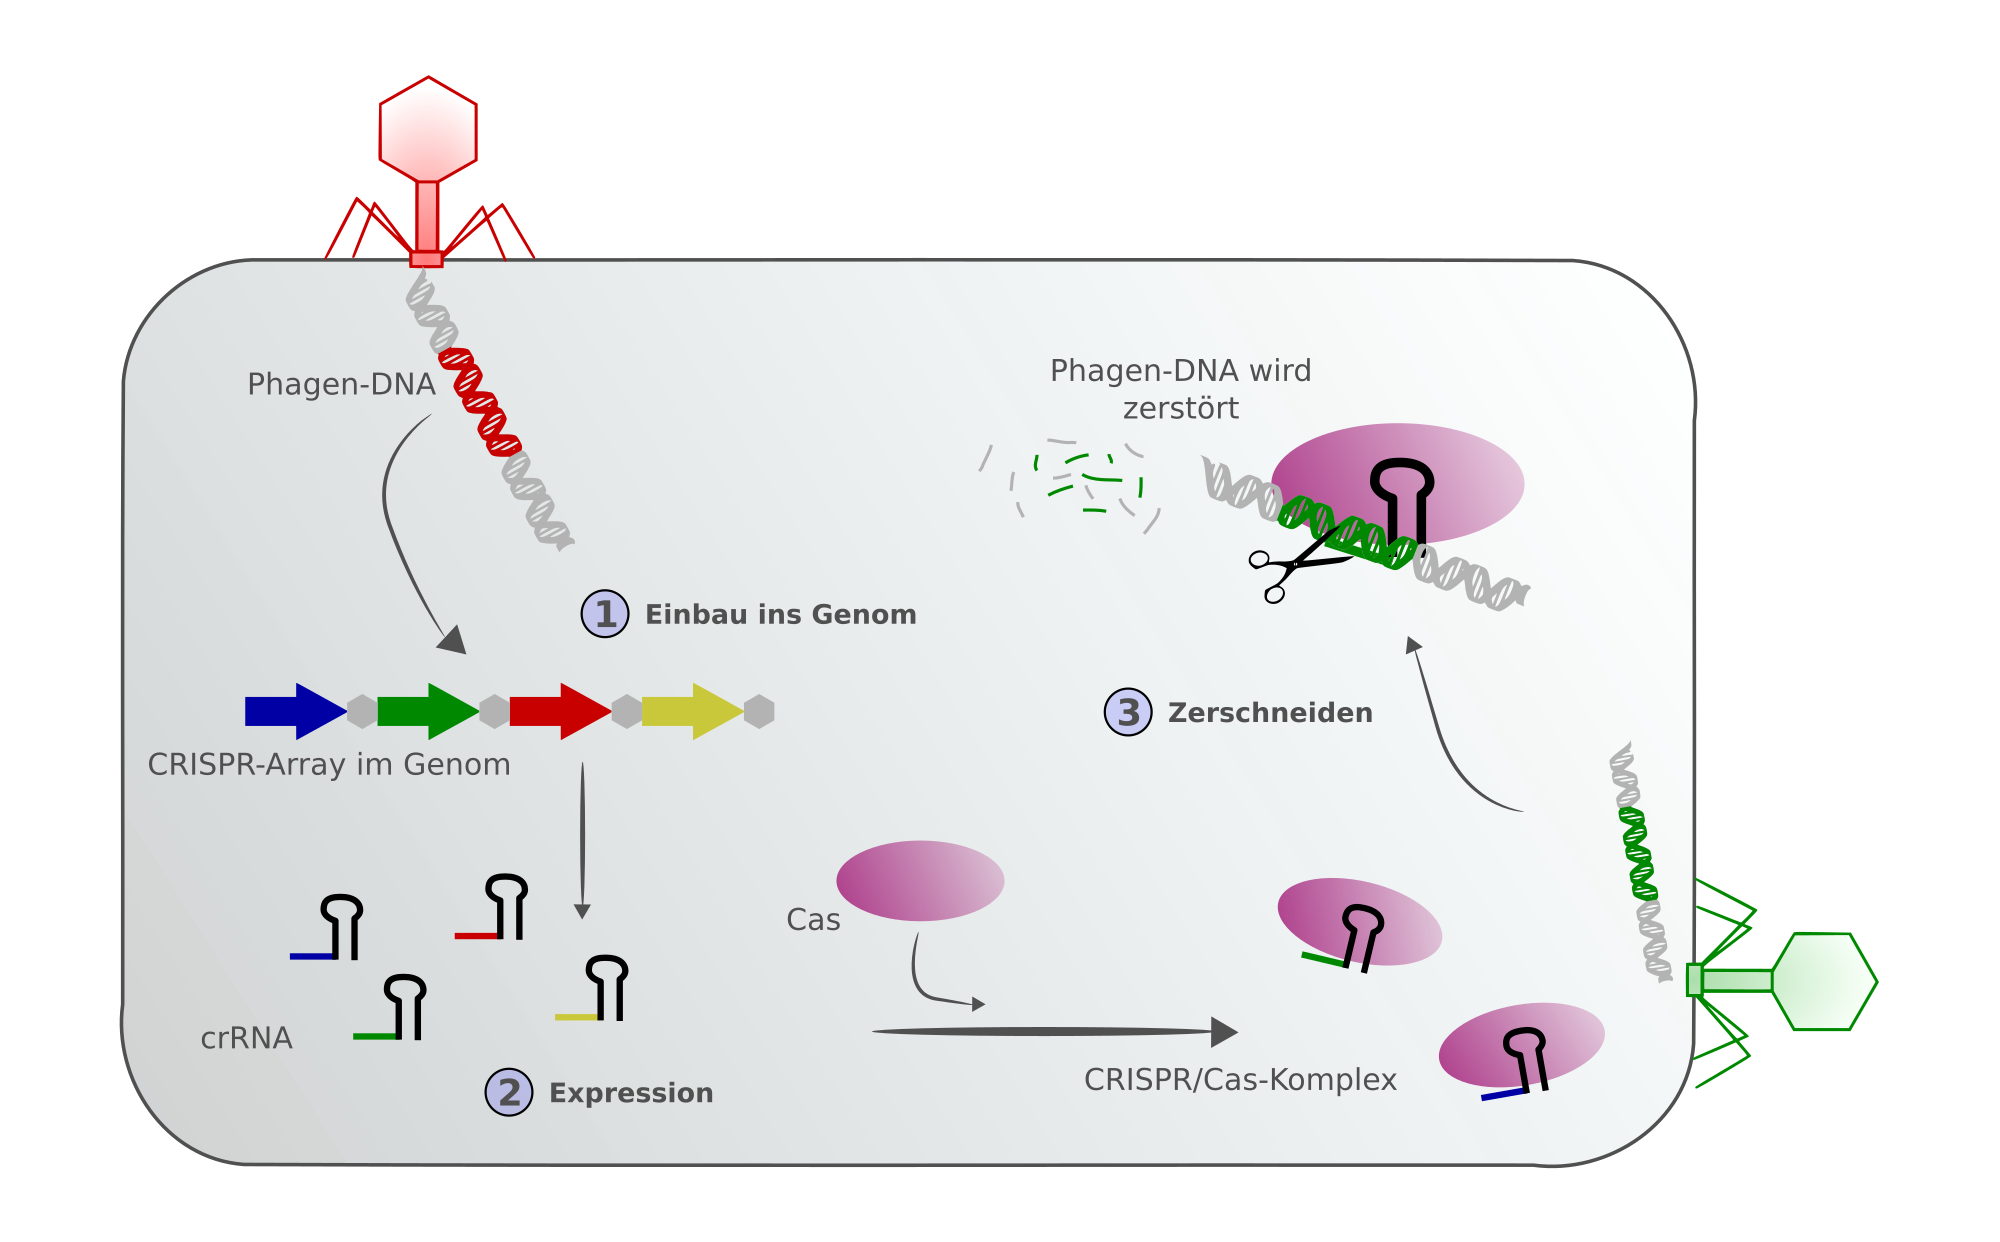 Schematic showing the defence chain of a prokaryote with CRISPR/Cas - integration of a phage genome into the CRISPR array and an infection of another phage whose genome is already "known" in the array. The new piece of DNA is immediately destroyed by the CRISPR/Cas complex.